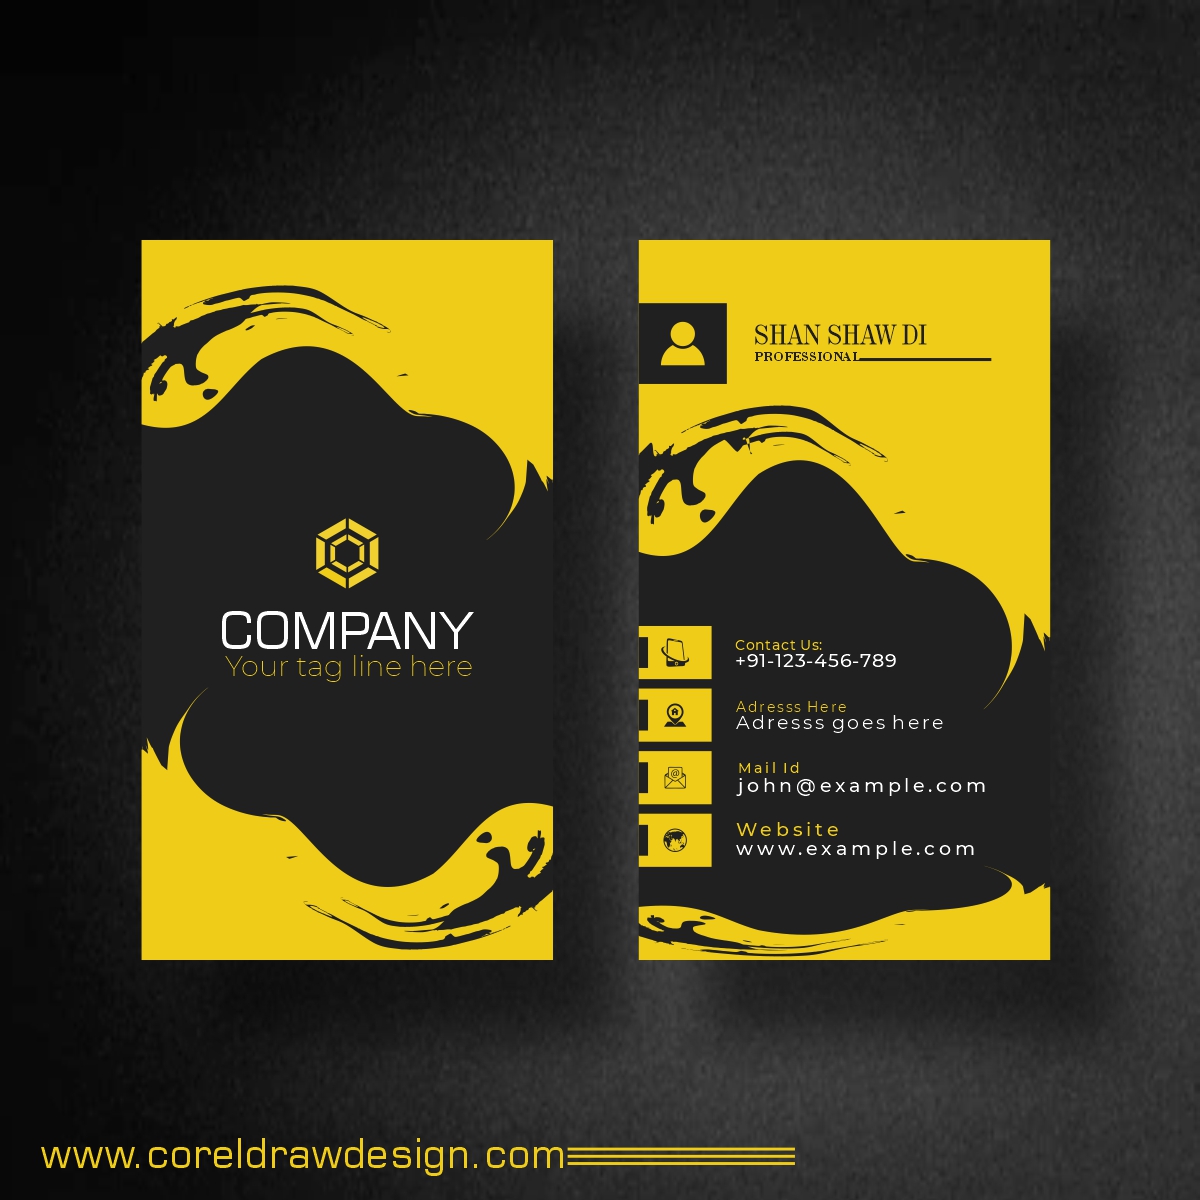 Download Stylish Business Card Design Free Vector  CorelDraw Within Visiting Card Templates Download